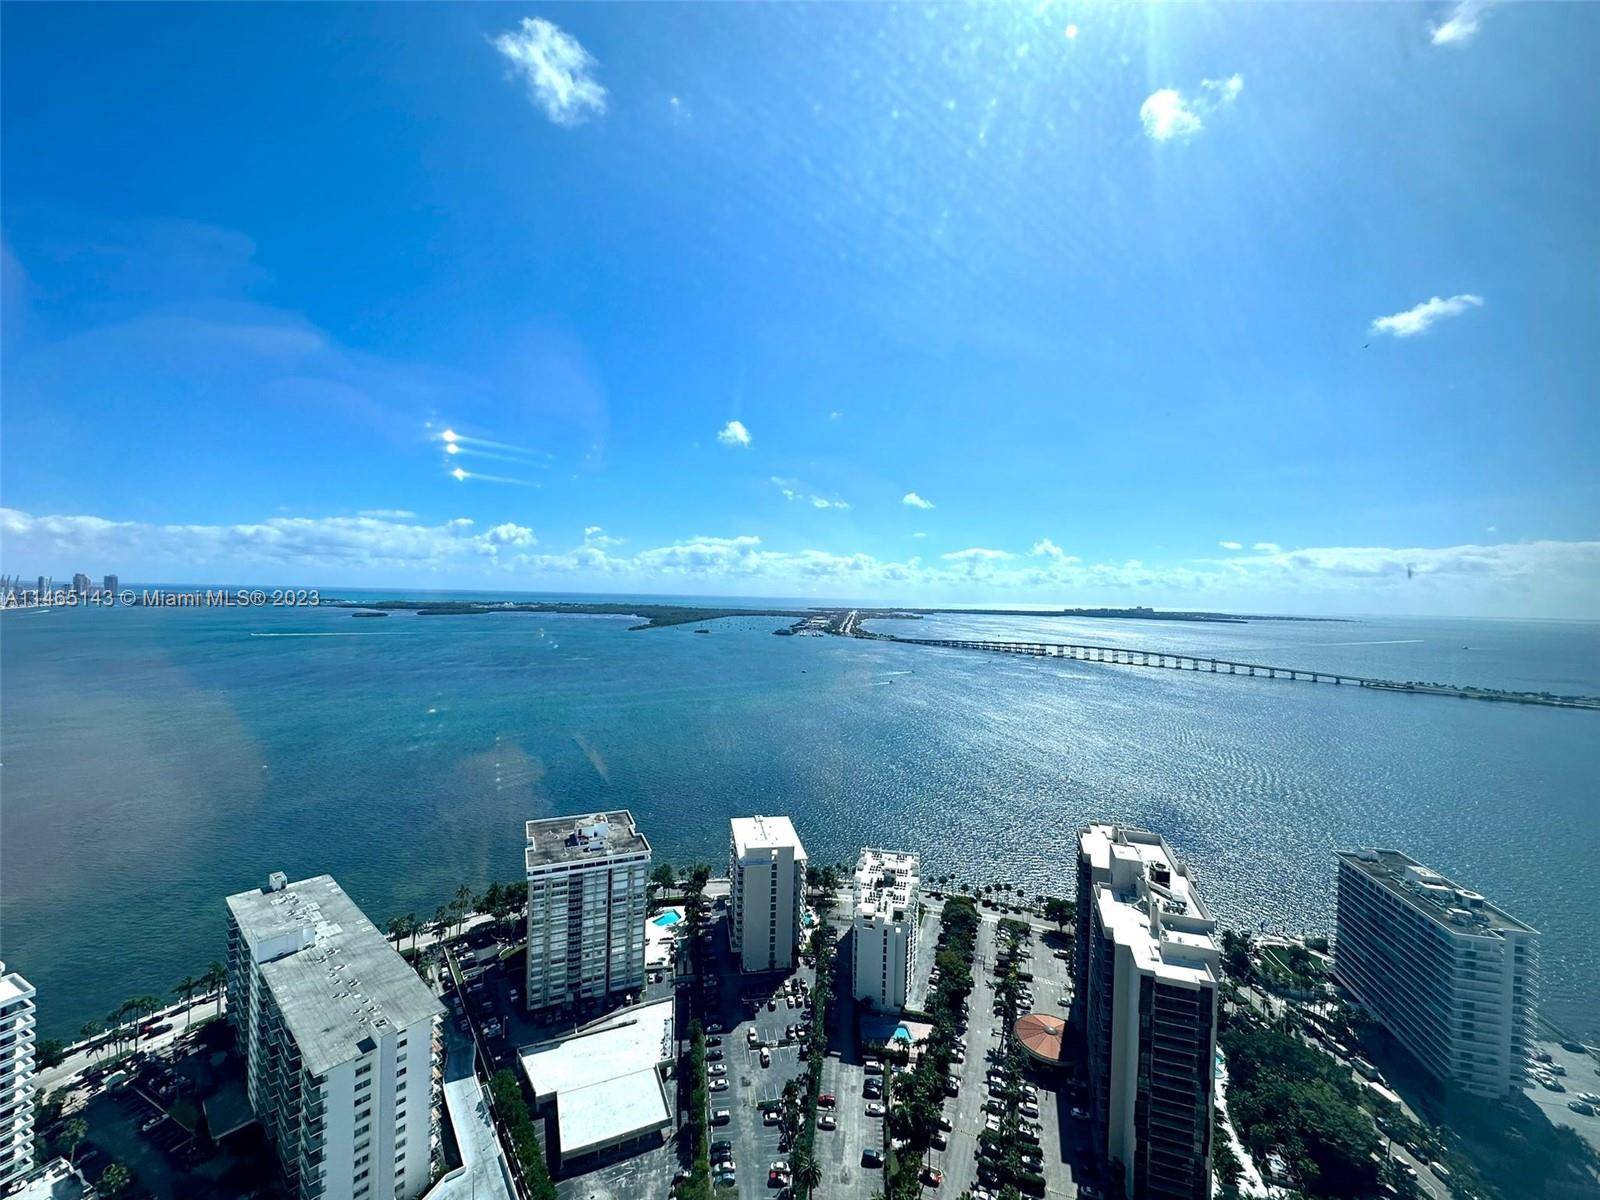 Luxury Living at Four Seasons Residence in Brickell, Miami, FL Experience opulent living in this 3 bedroom apartment at Four Seasons Residence in Brickell, Miami.